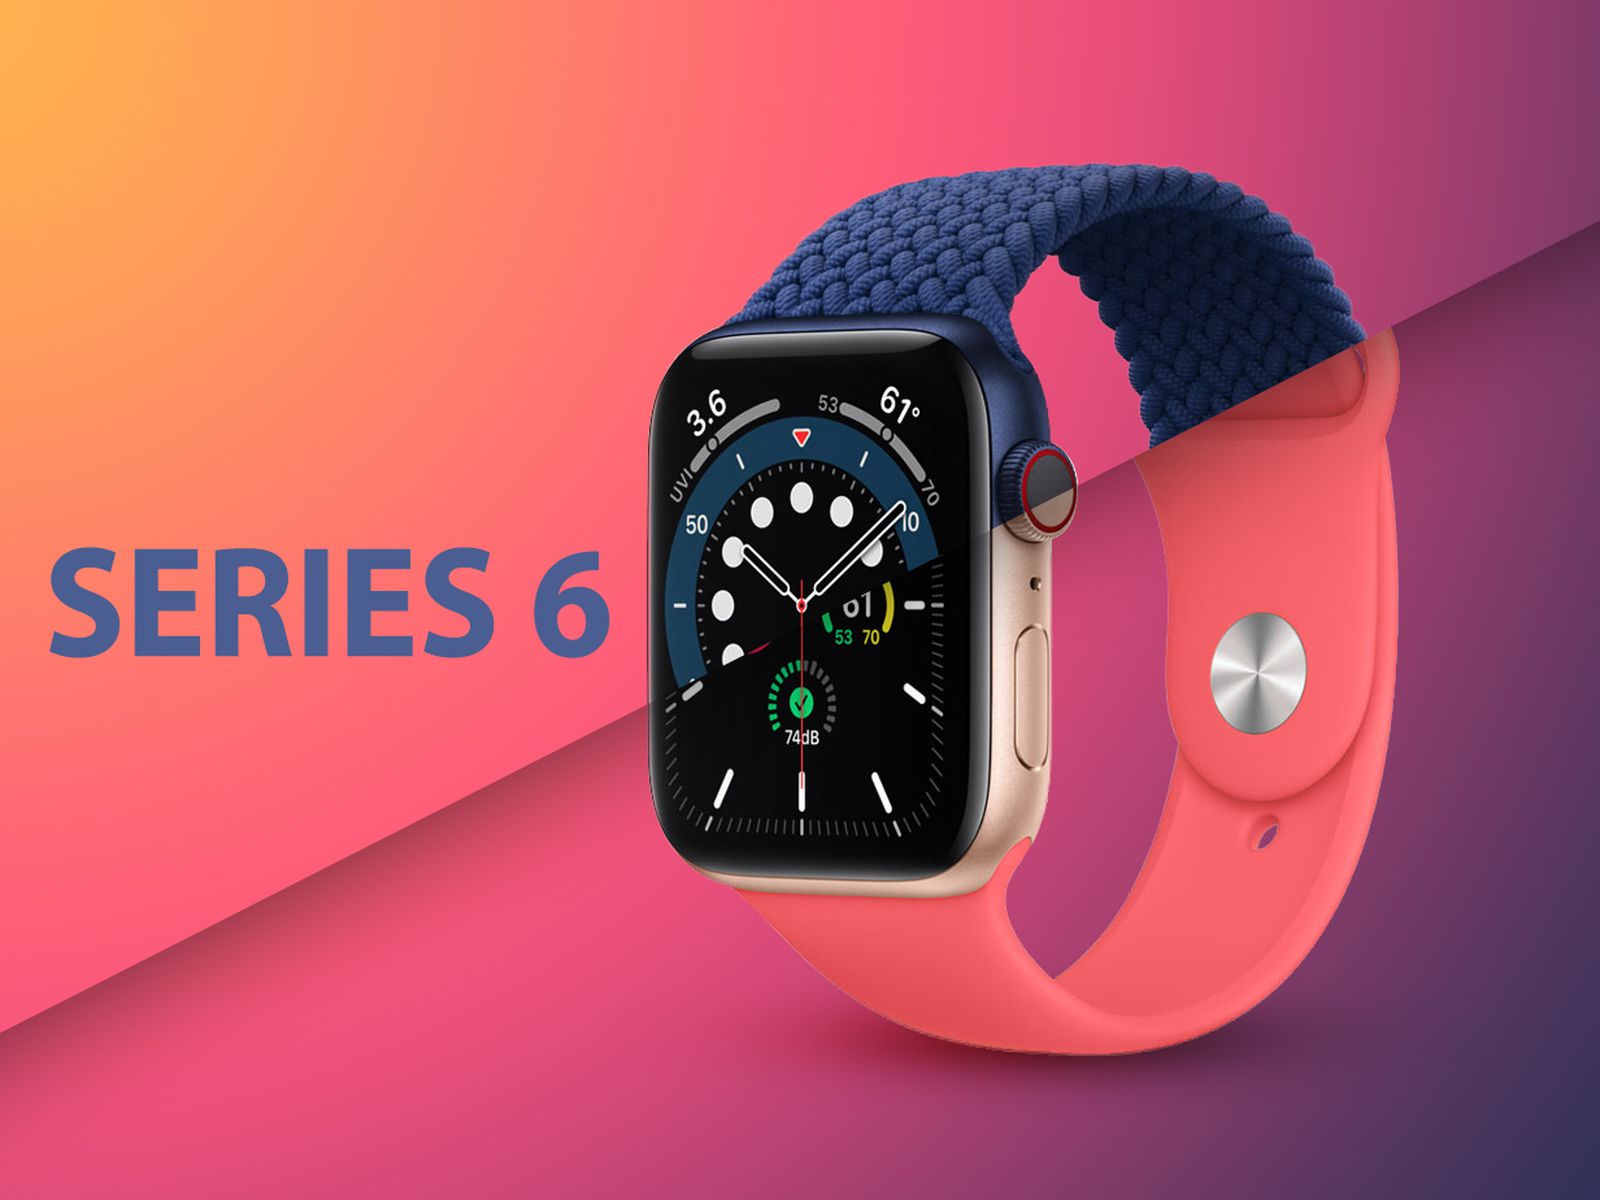 Portico At first Charlotte Bronte Apple Watch SE vs. Apple Watch Series 6 Buyer's Guide - MacRumors